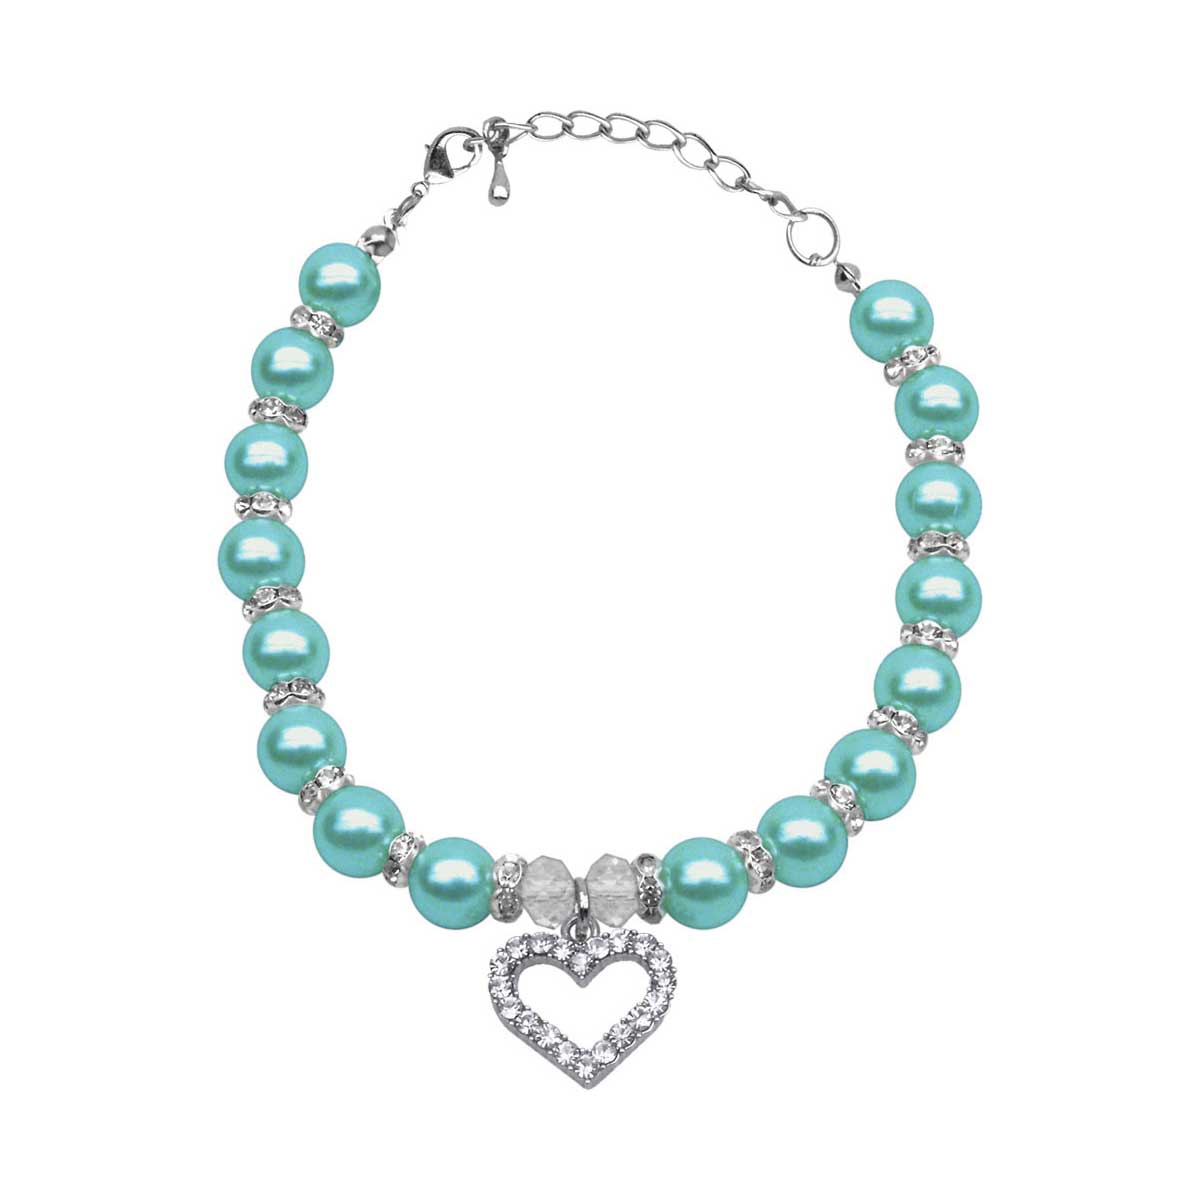 Crystal Heart Necklace with Aqua Pearls | Pawlicious & Company